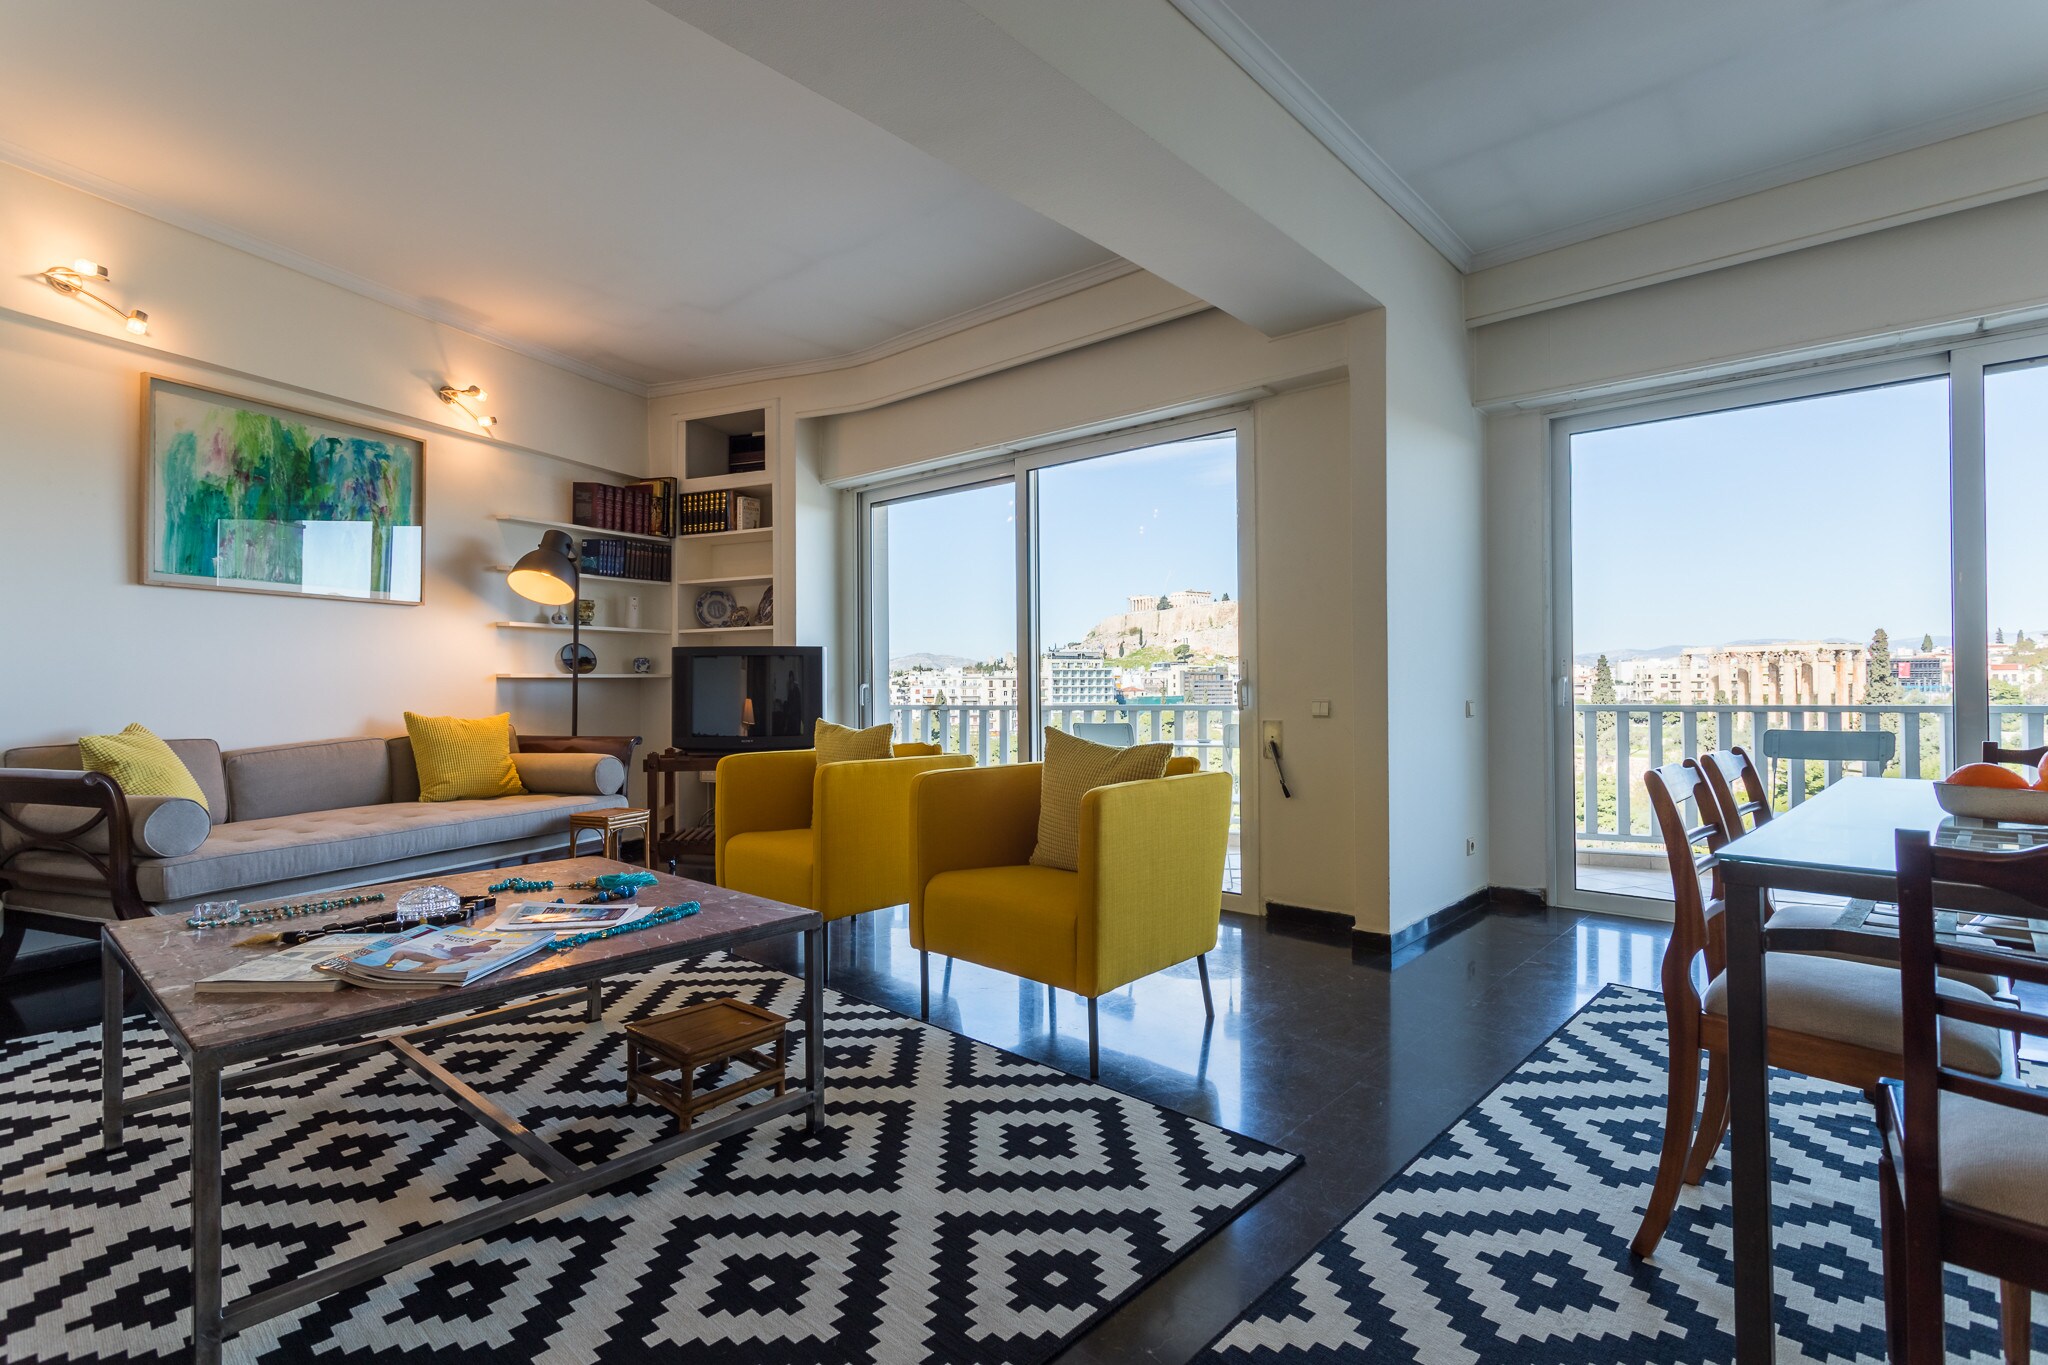 Property Image 1 - Traditional Apartment with Fireplace, Balcony and Incredible Acropolis View